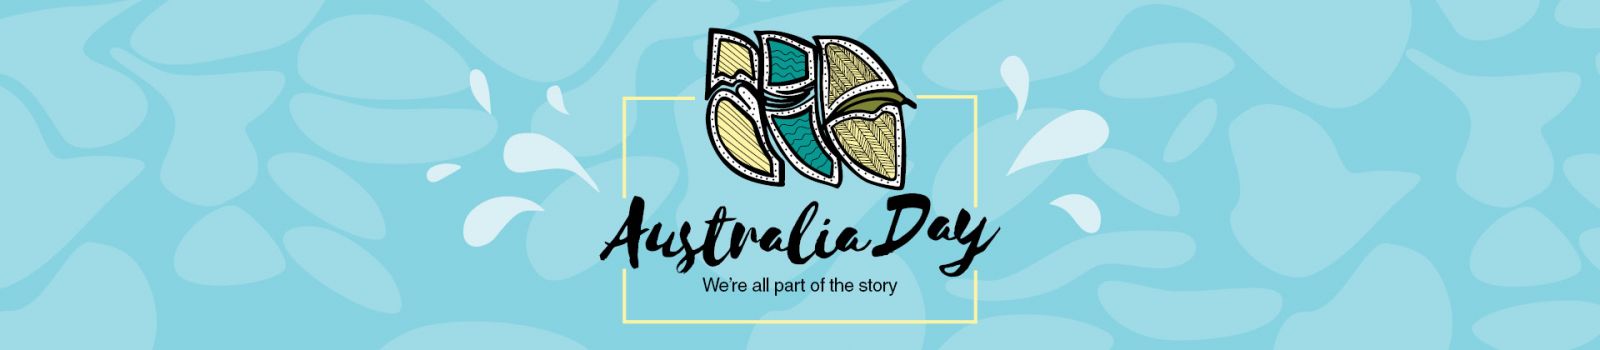 Australia Day pool party at Lakeside Leisure Centre banner image